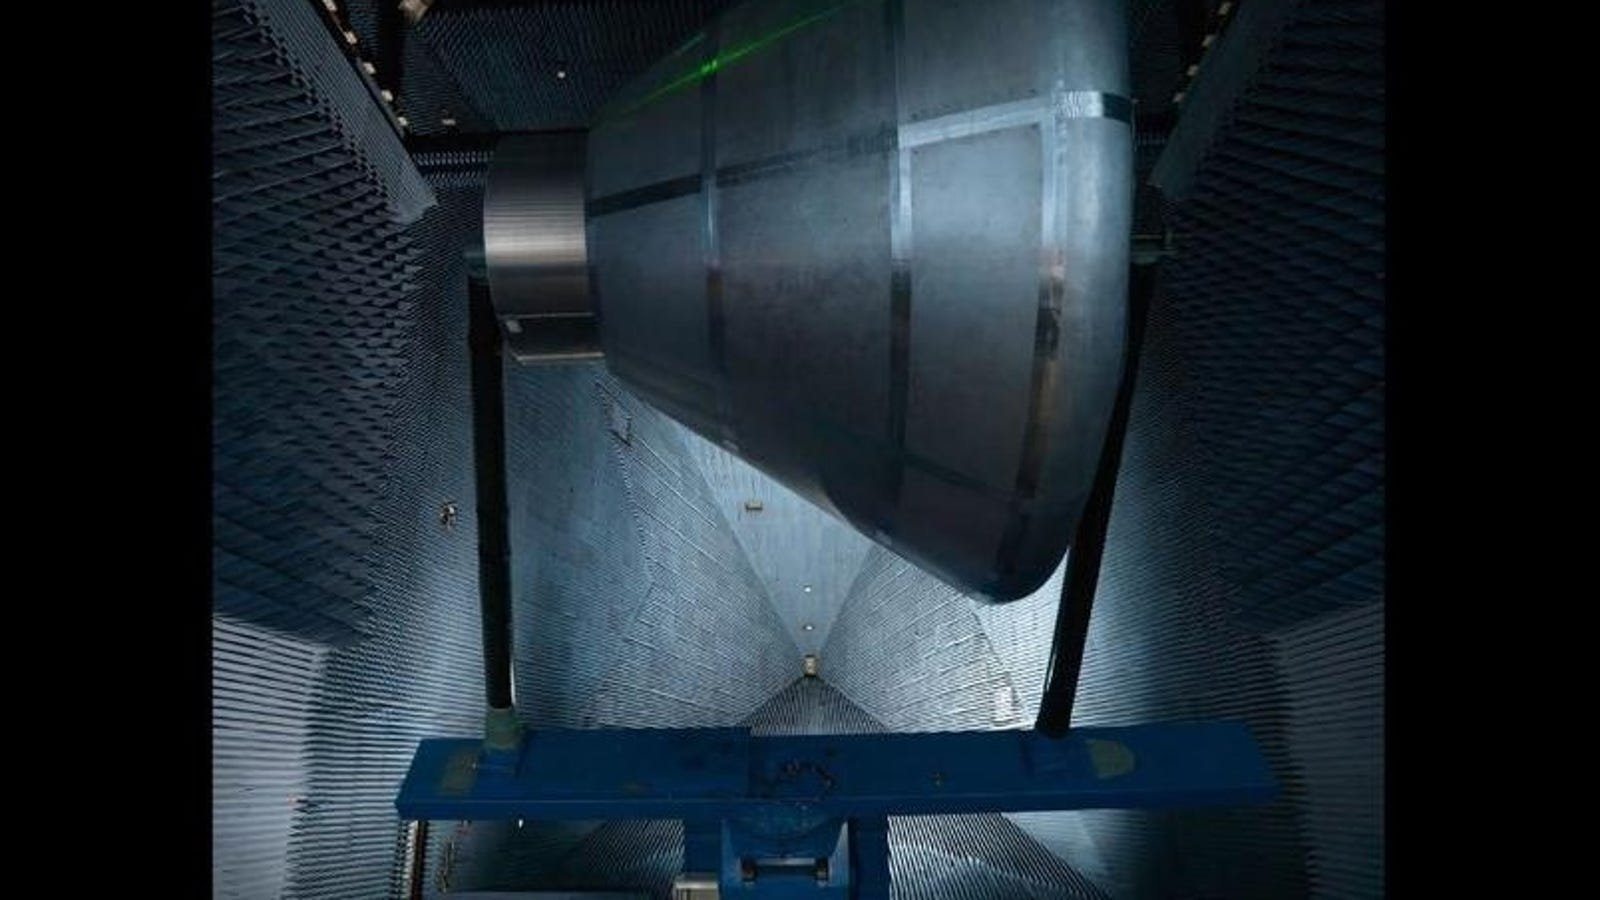 chamber anechoic capsule testing orion under